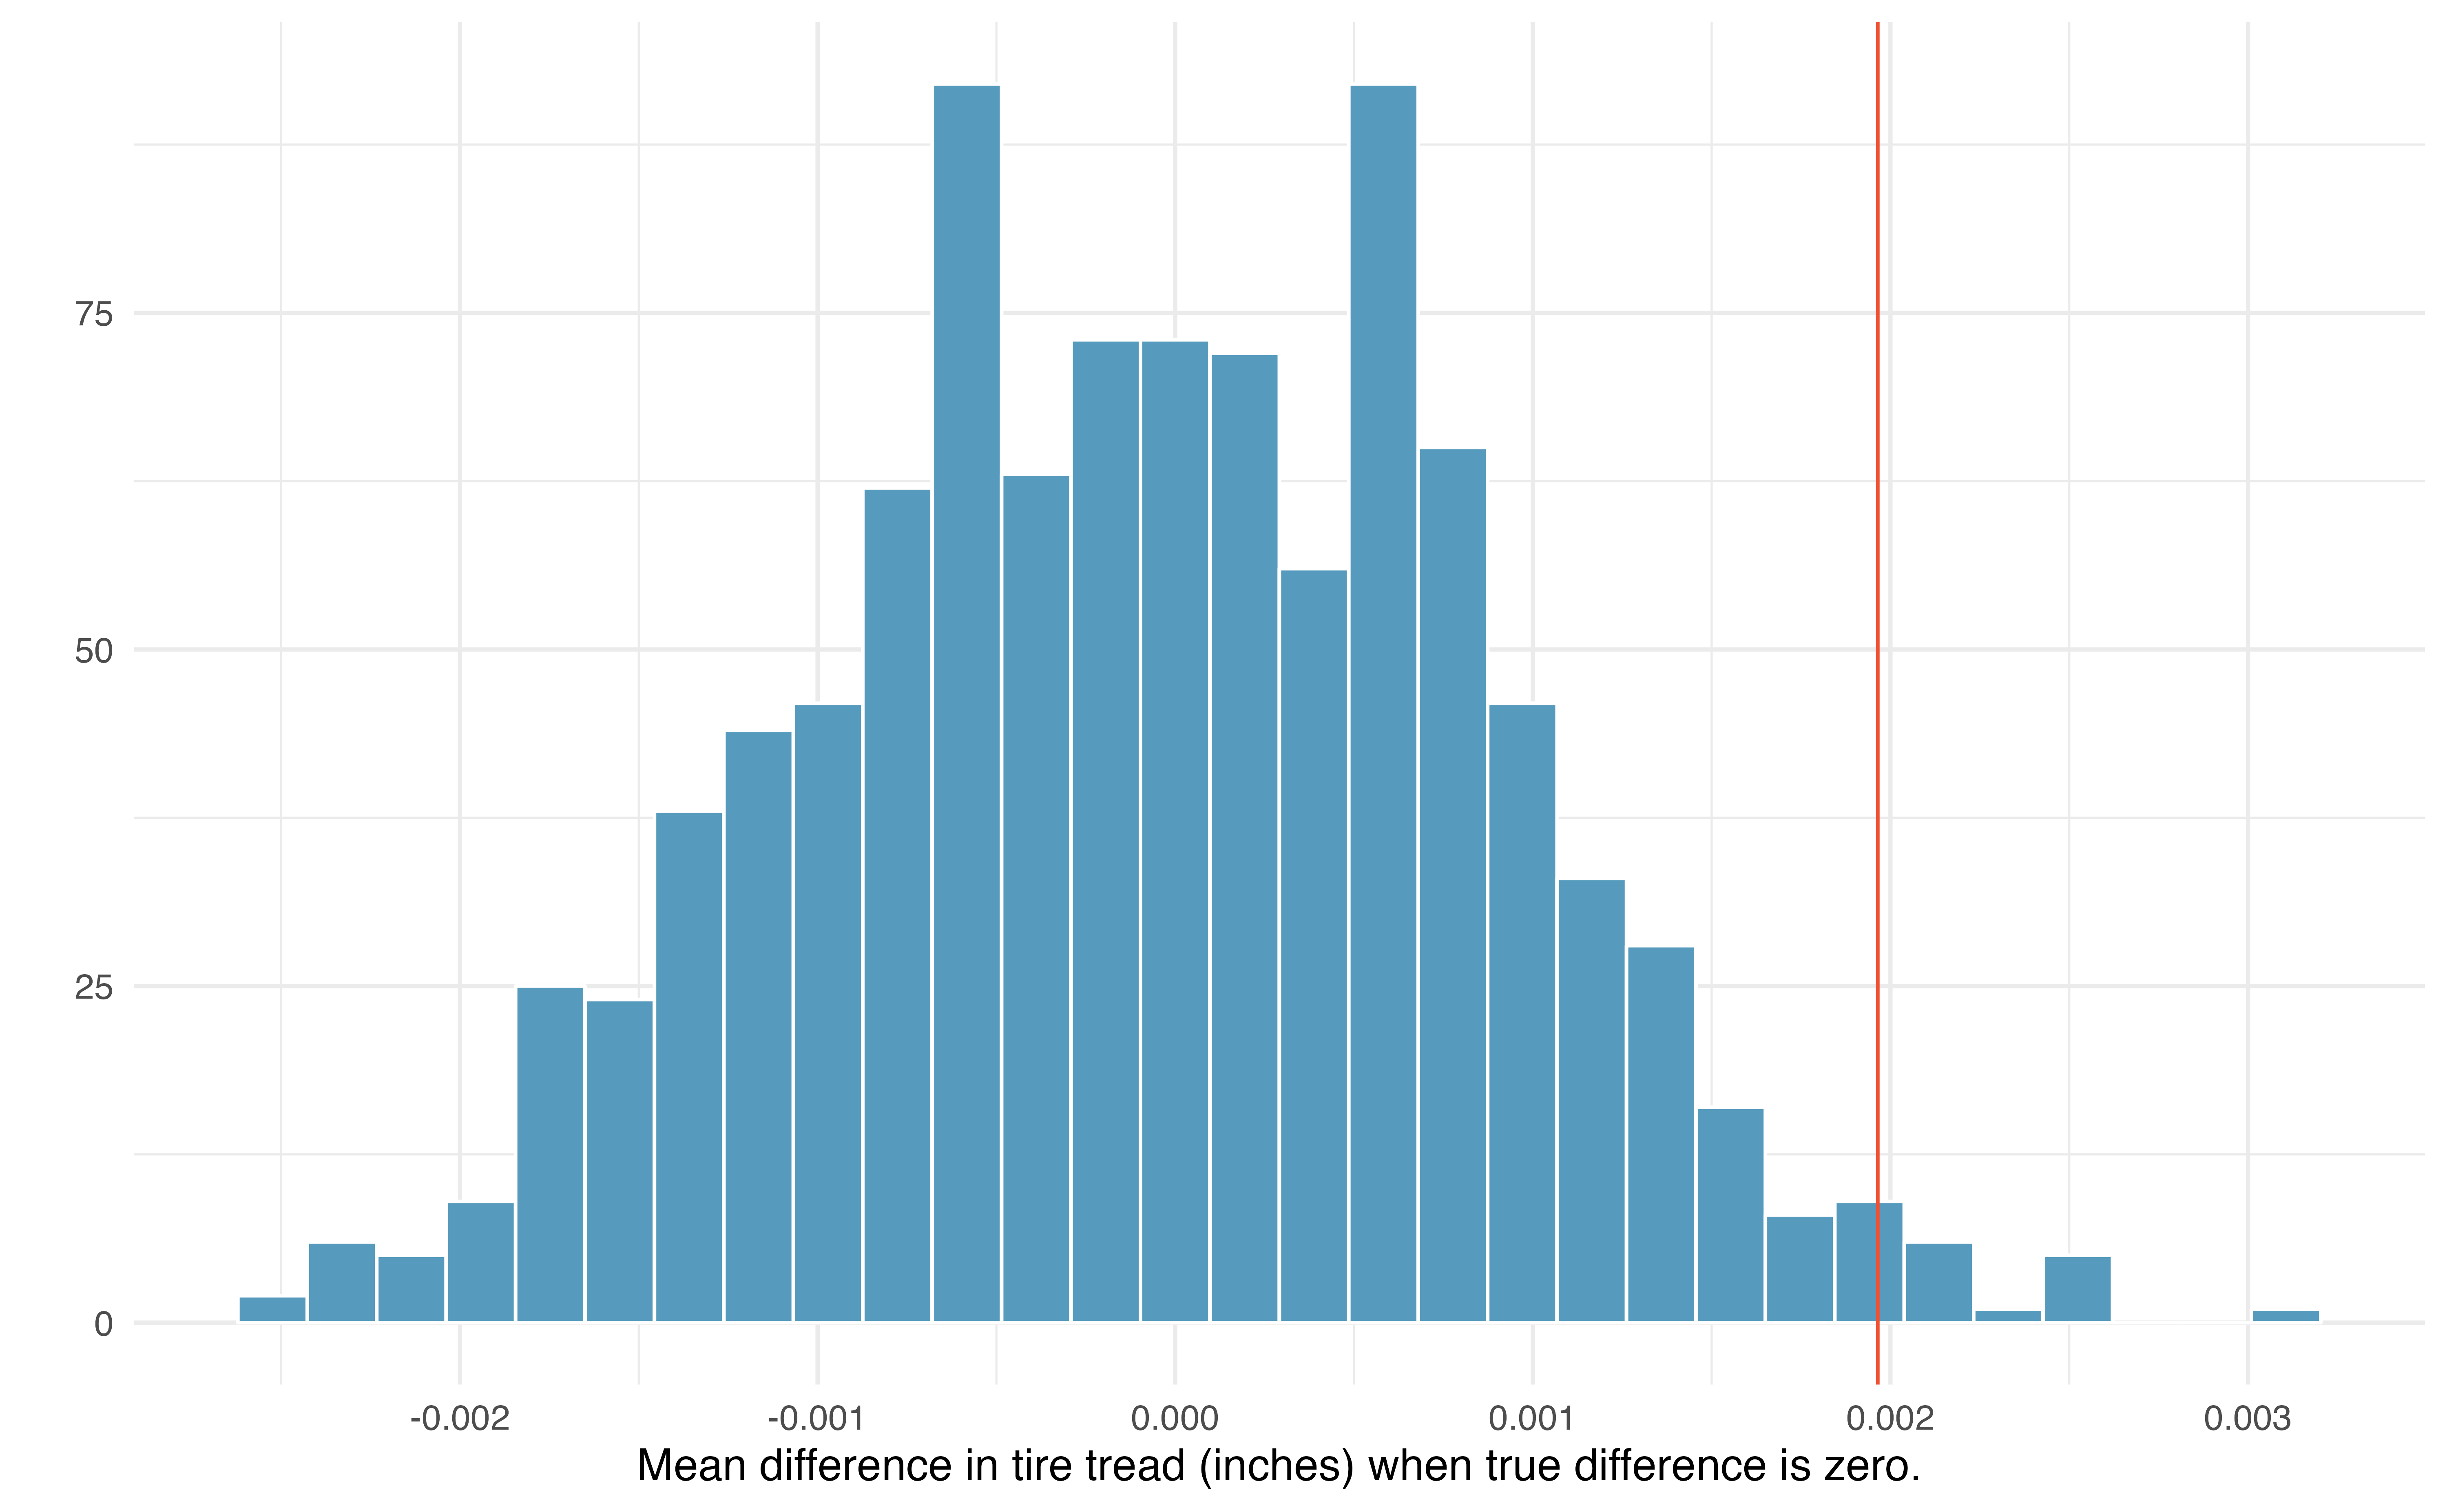 Histogram of 1000 simulated mean differences in tire tread, assuming that the two brands perform equally, on average.